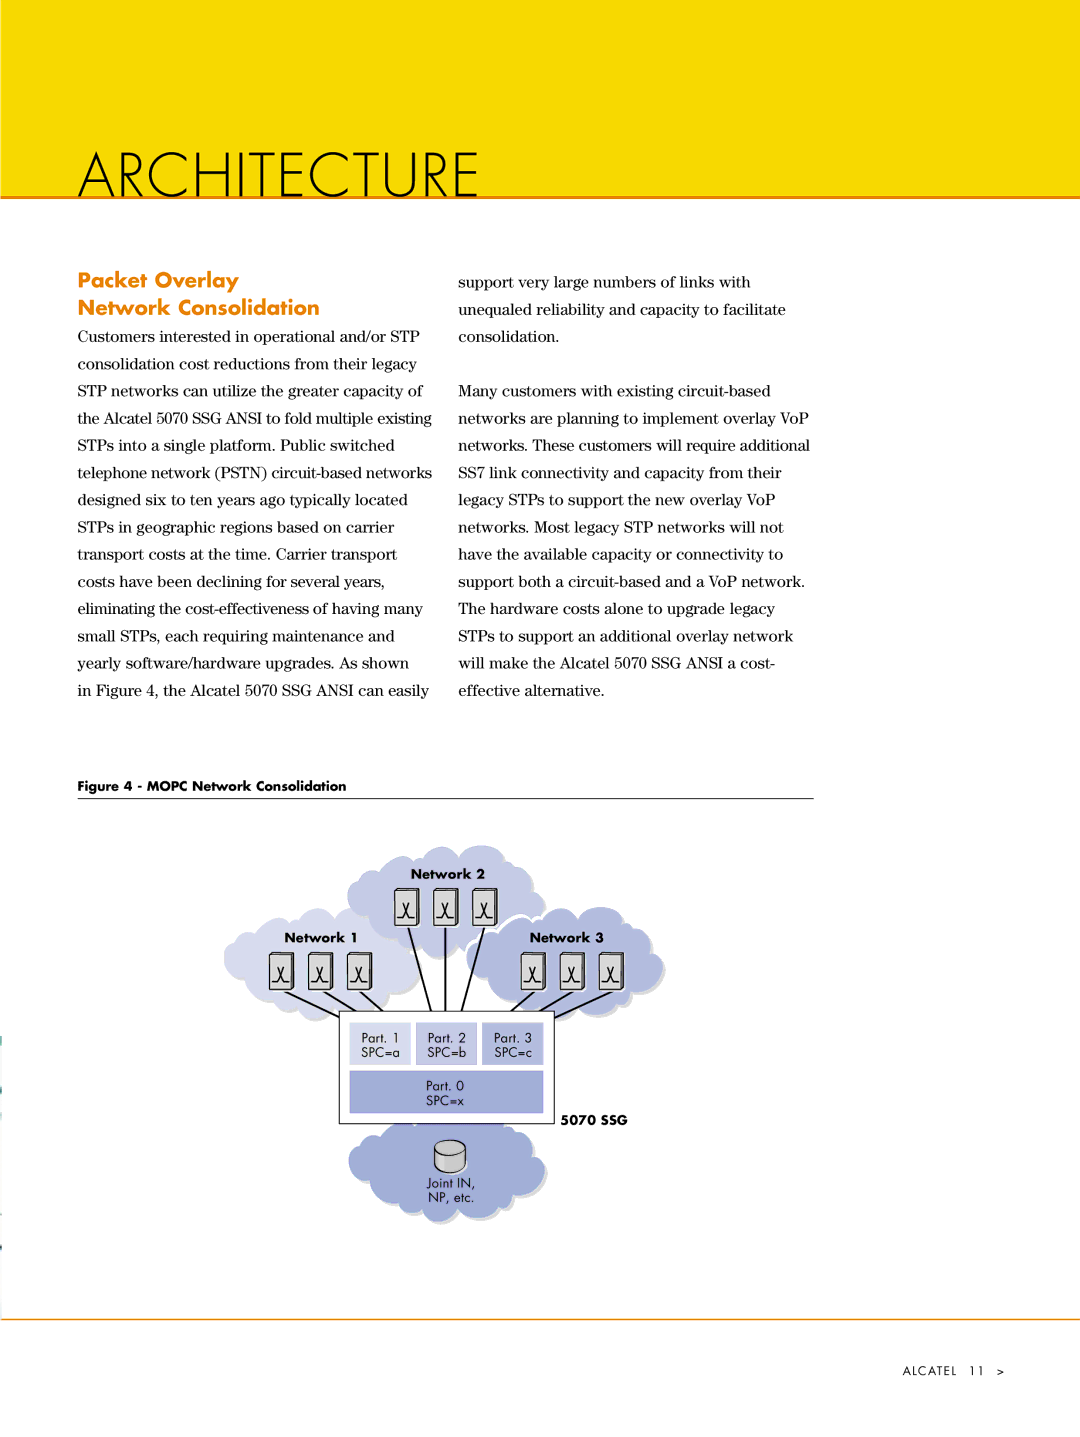 Riverstone Networks SSG manual Architecture, Packet Overlay Network Consolidation 